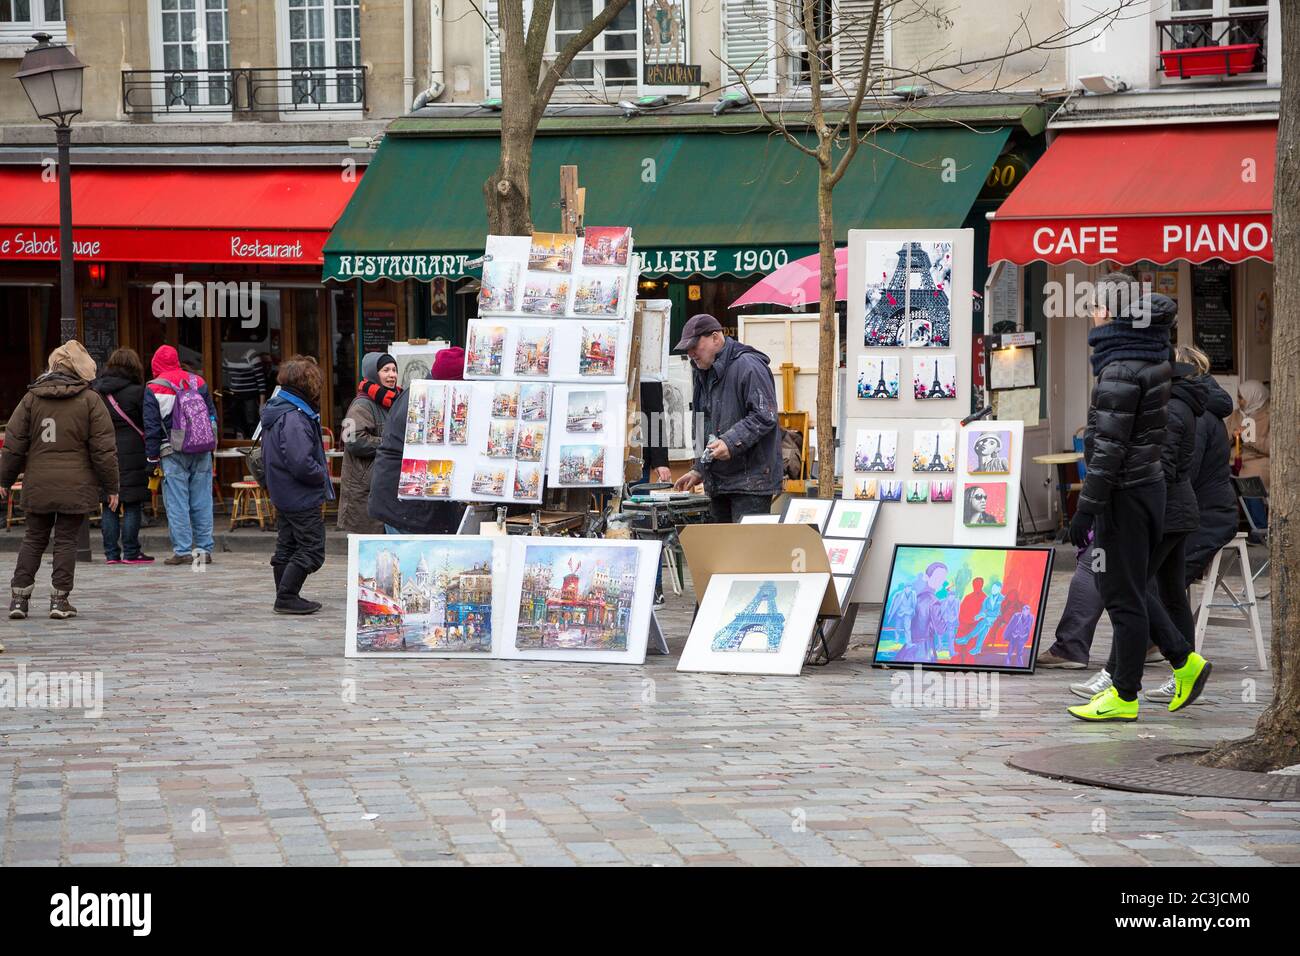 PARIS, FRANCE - MARCH 3RD: Street artists display their work in a cobbled market square in Montmartre, 18th Arrondissement. On March 3rd 2015 Stock Photo